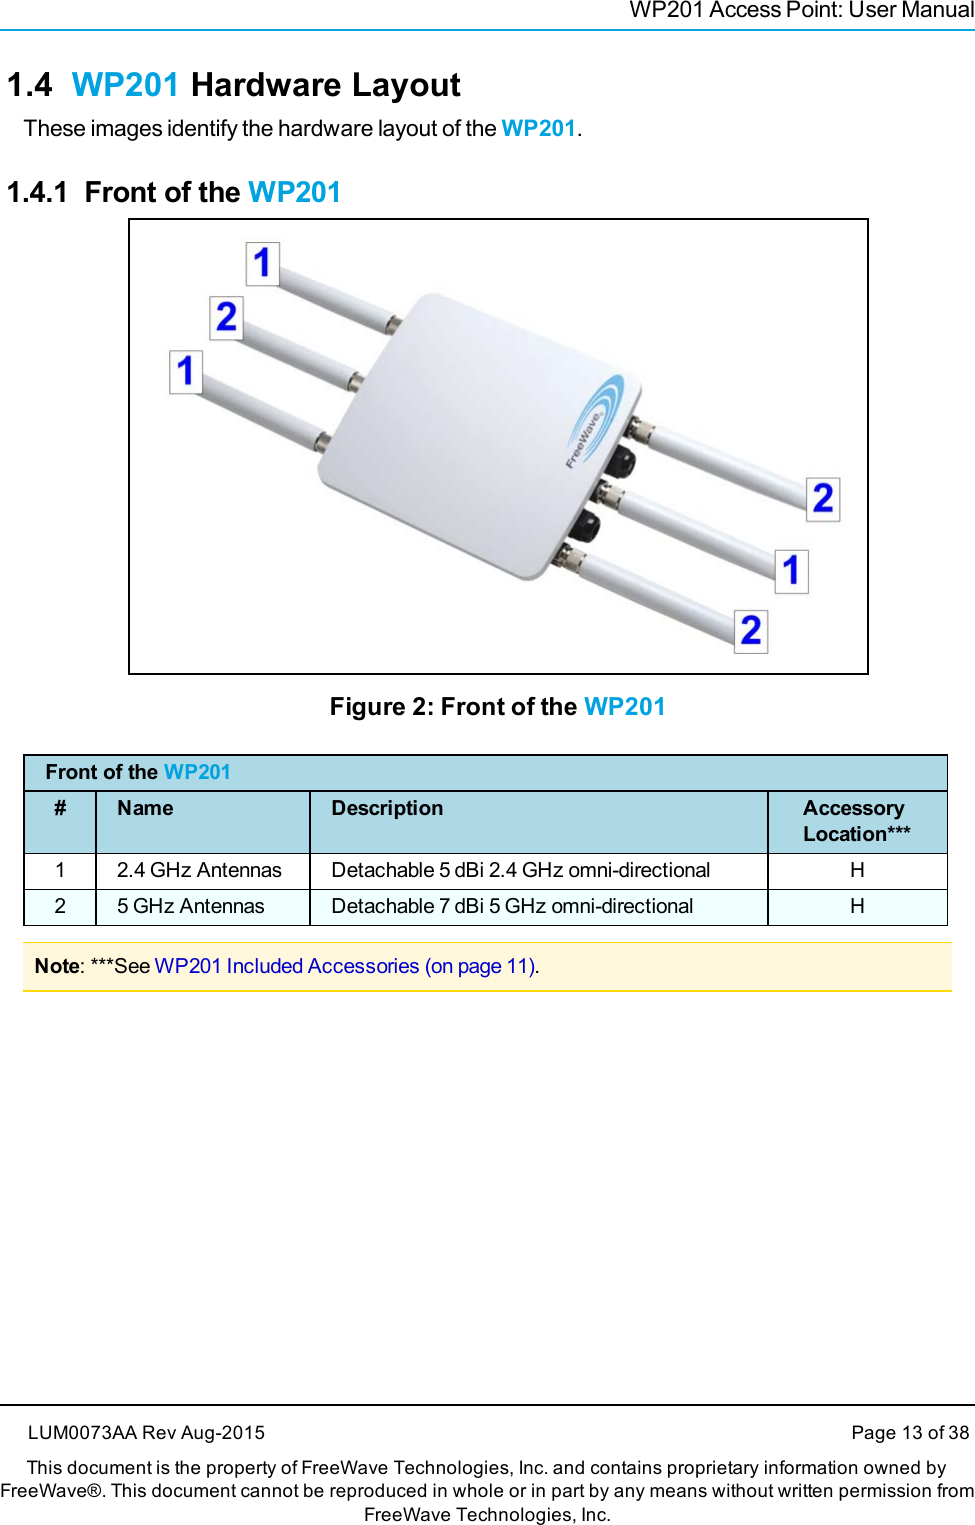 WP201 Access Point: User Manual1.4 WP201 Hardware LayoutThese images identify the hardware layout of the WP201.1.4.1 Front of the WP201Figure 2: Front of the WP201Front of the WP201# Name Description AccessoryLocation***1 2.4 GHz Antennas Detachable 5 dBi 2.4 GHz omni-directional H2 5 GHz Antennas Detachable 7 dBi 5 GHz omni-directional HNote: ***See WP201 Included Accessories (on page 11).LUM0073AA Rev Aug-2015 Page 13 of 38This document is the property of FreeWave Technologies, Inc. and contains proprietary information owned byFreeWave®. This document cannot be reproduced in whole or in part by any means without written permission fromFreeWave Technologies, Inc.